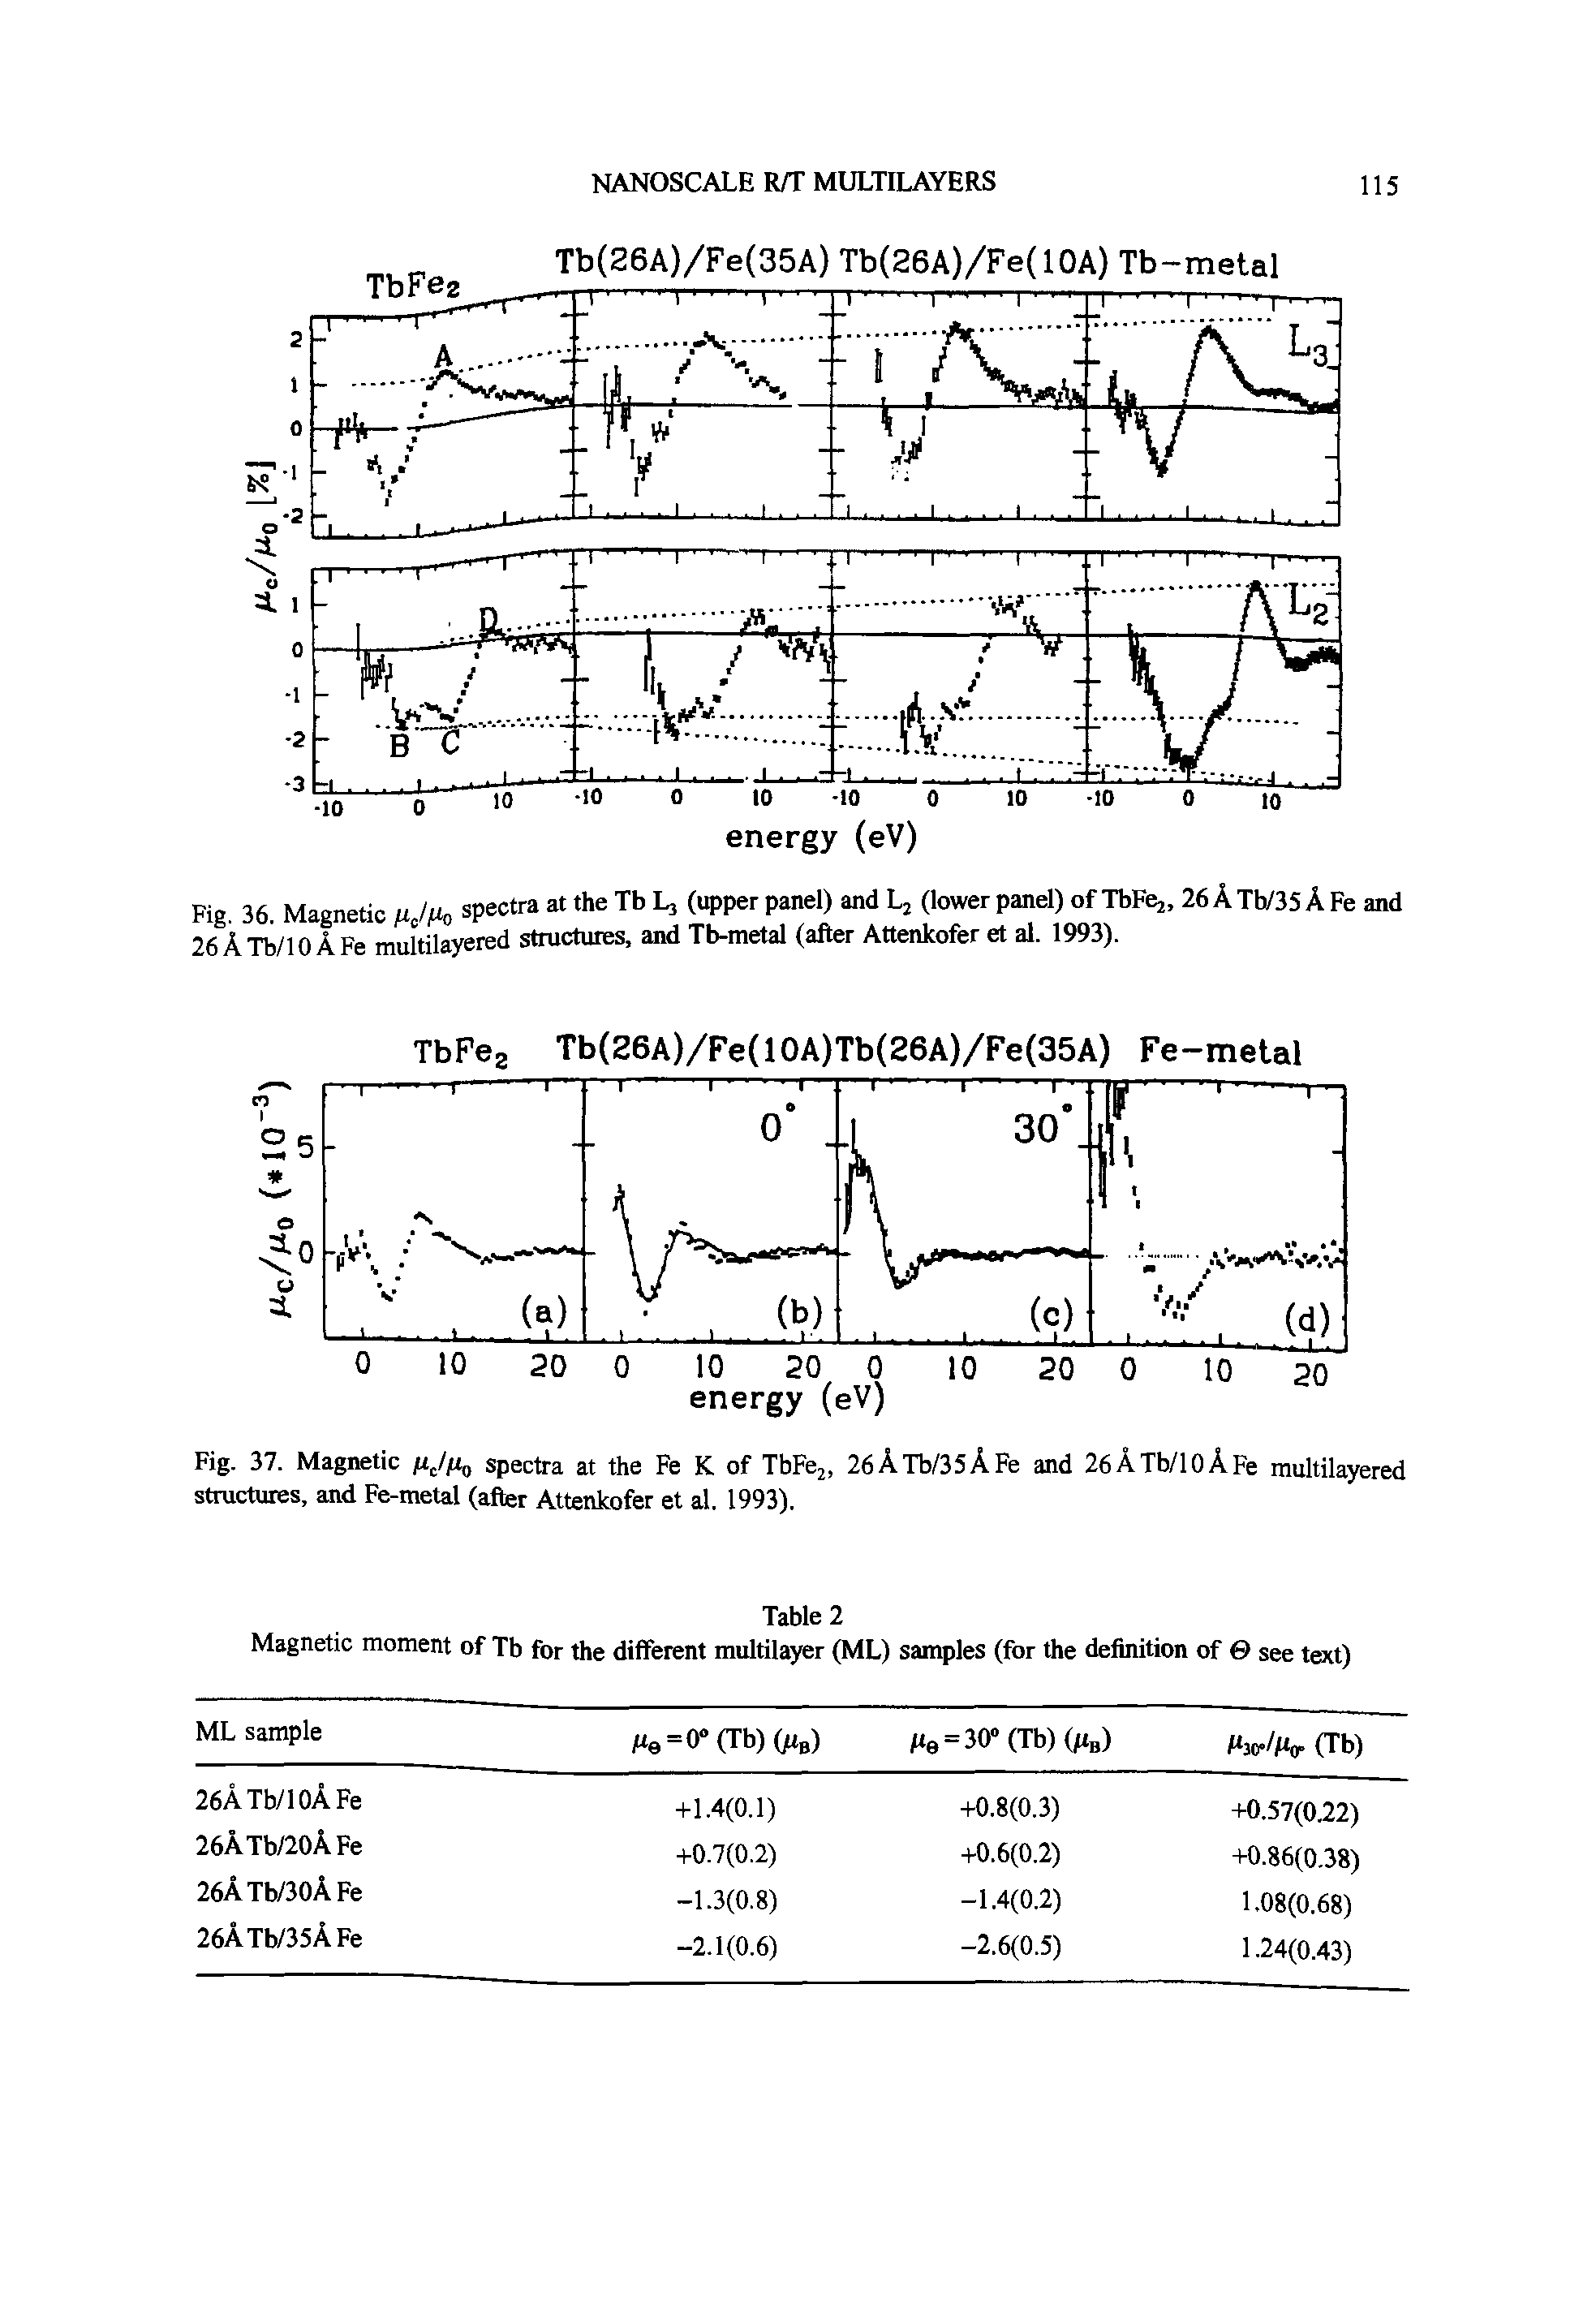 Fig. 37. Magnetic spectra at the Fe K of TbFej, 26ATb/35AFe and 26ATb/10AFe multilayered structures, and Fe-metal (after Attenkofer et al. 1993).